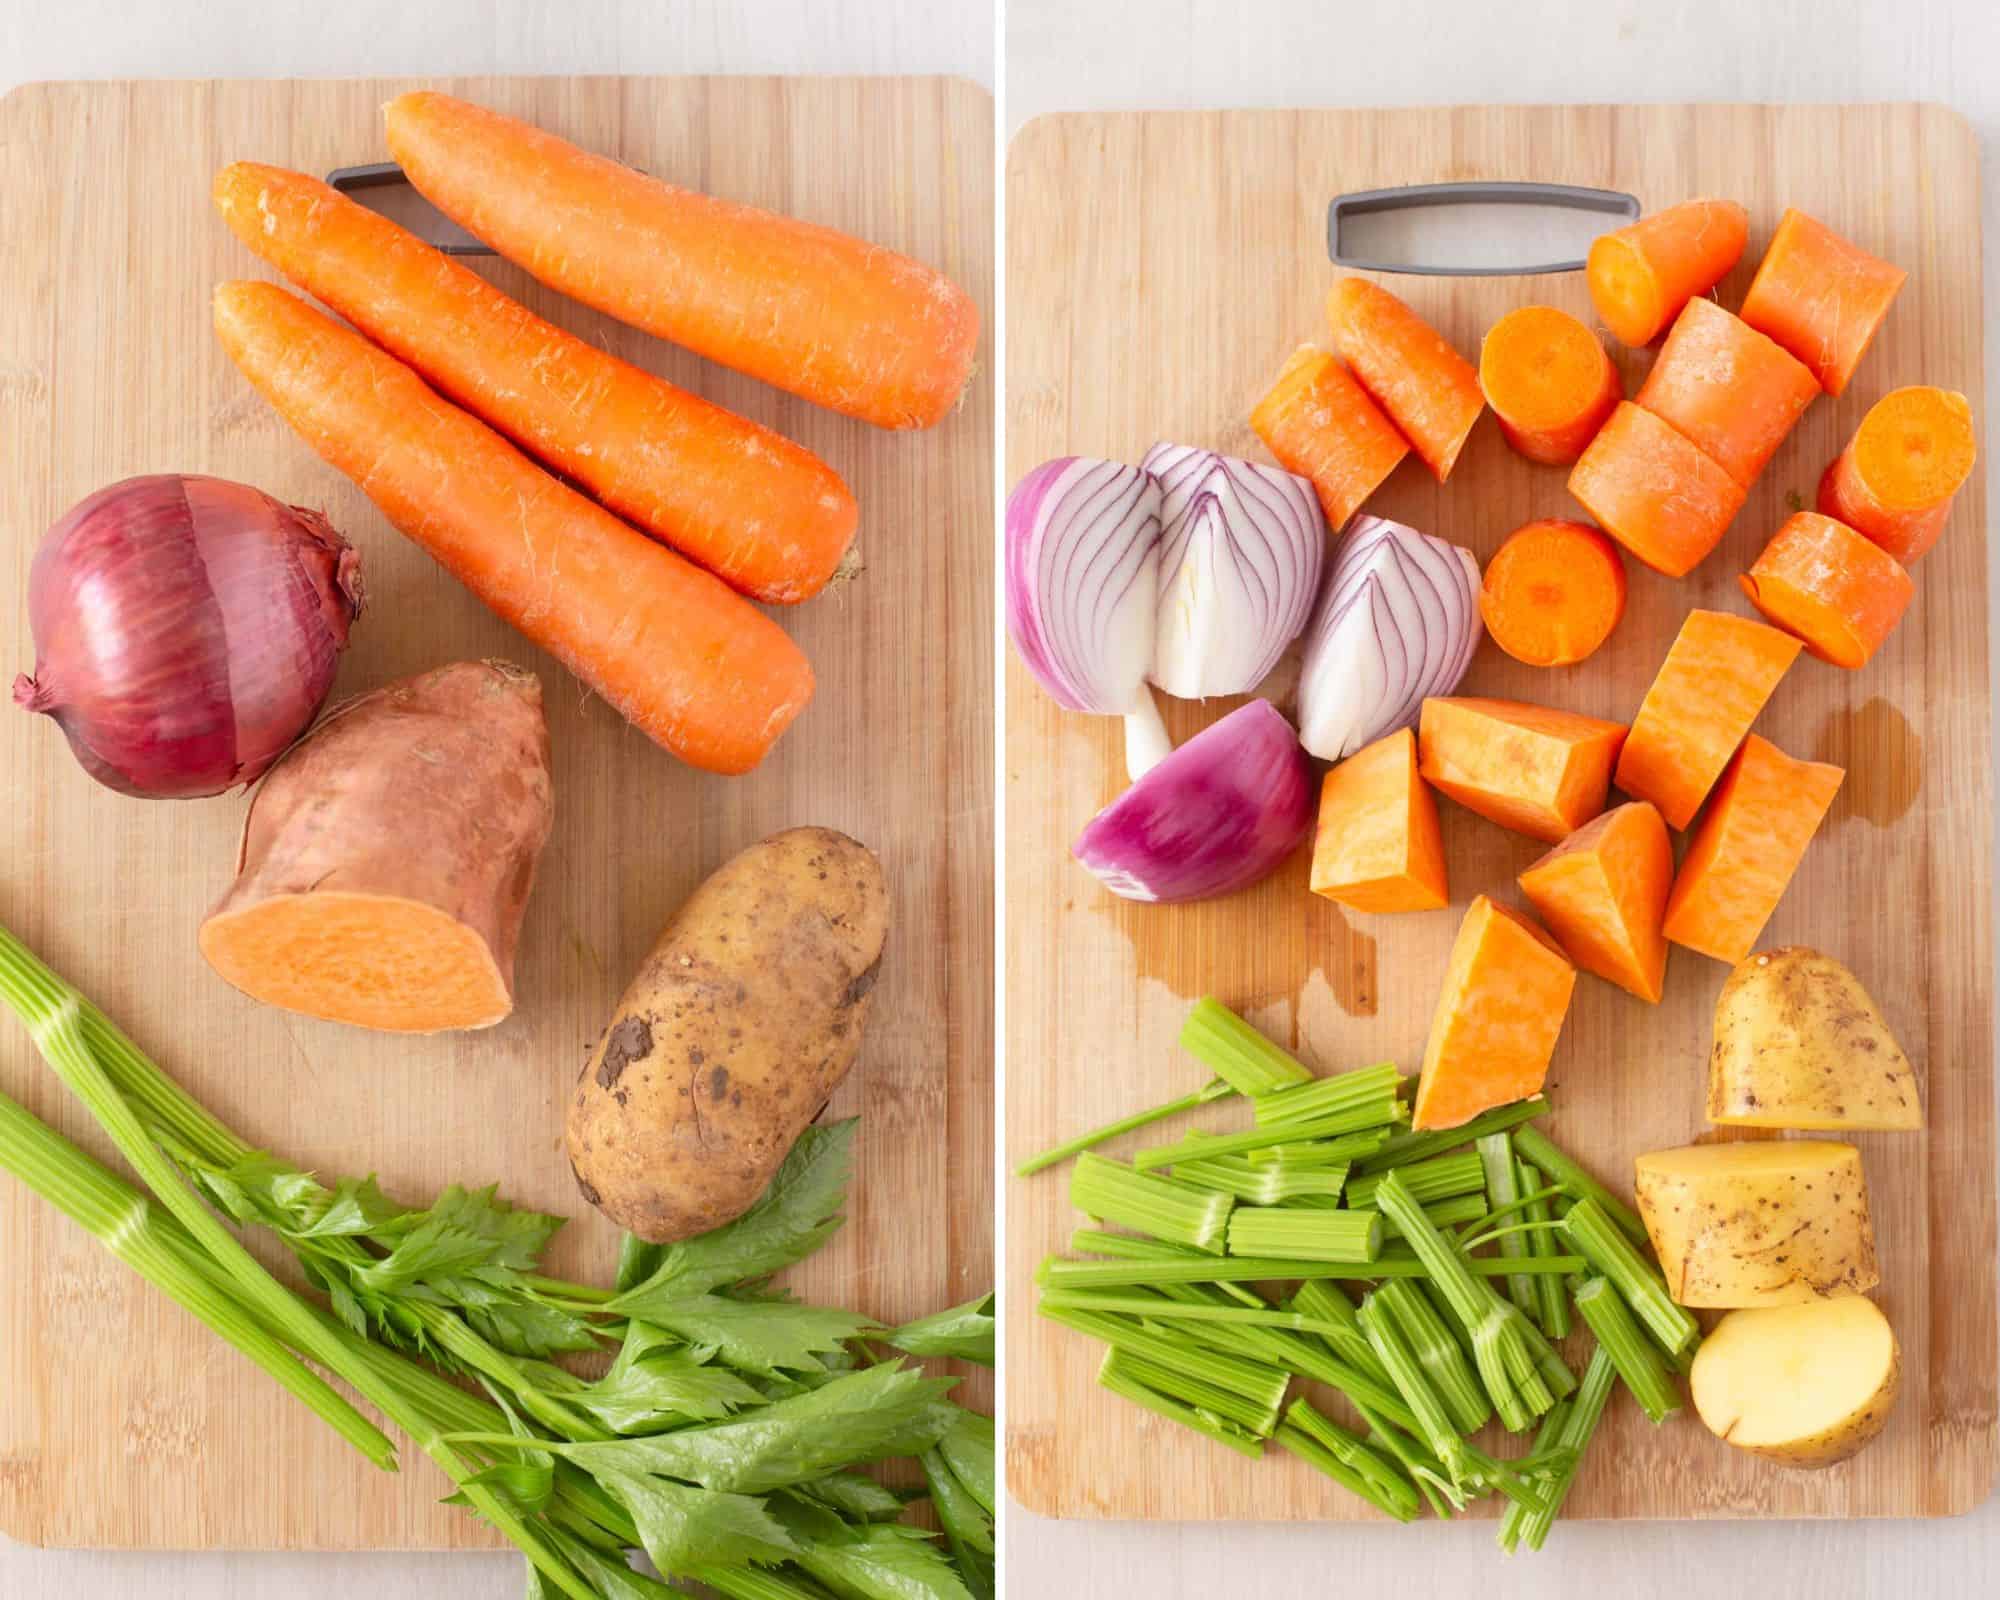 All vegetables sitting on wooden chopping board before and after being cut up.